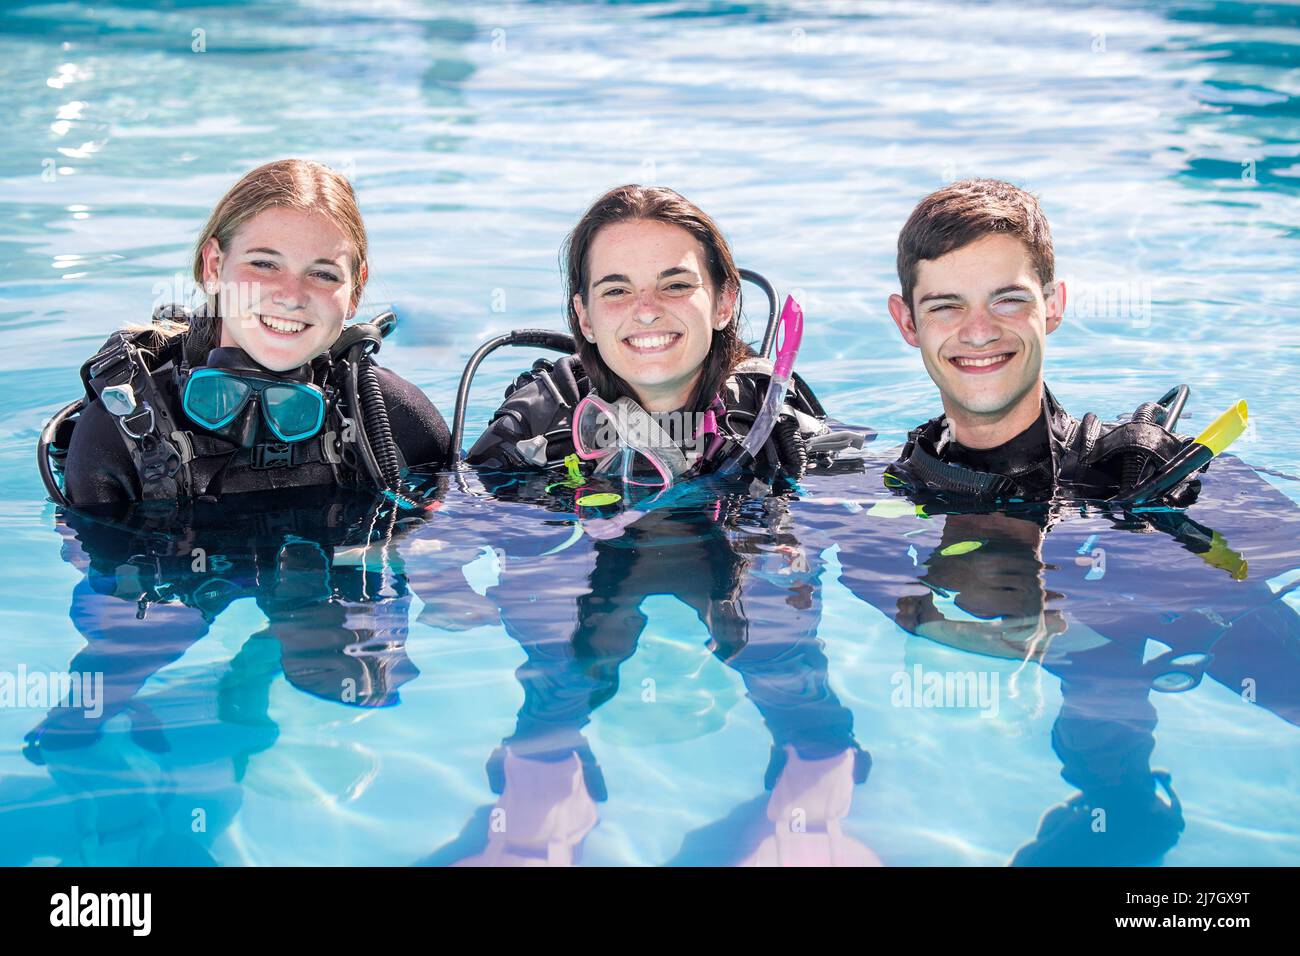 A group of happy scuba divers standing in a pool with their gear on smiling at the camera Stock Photo